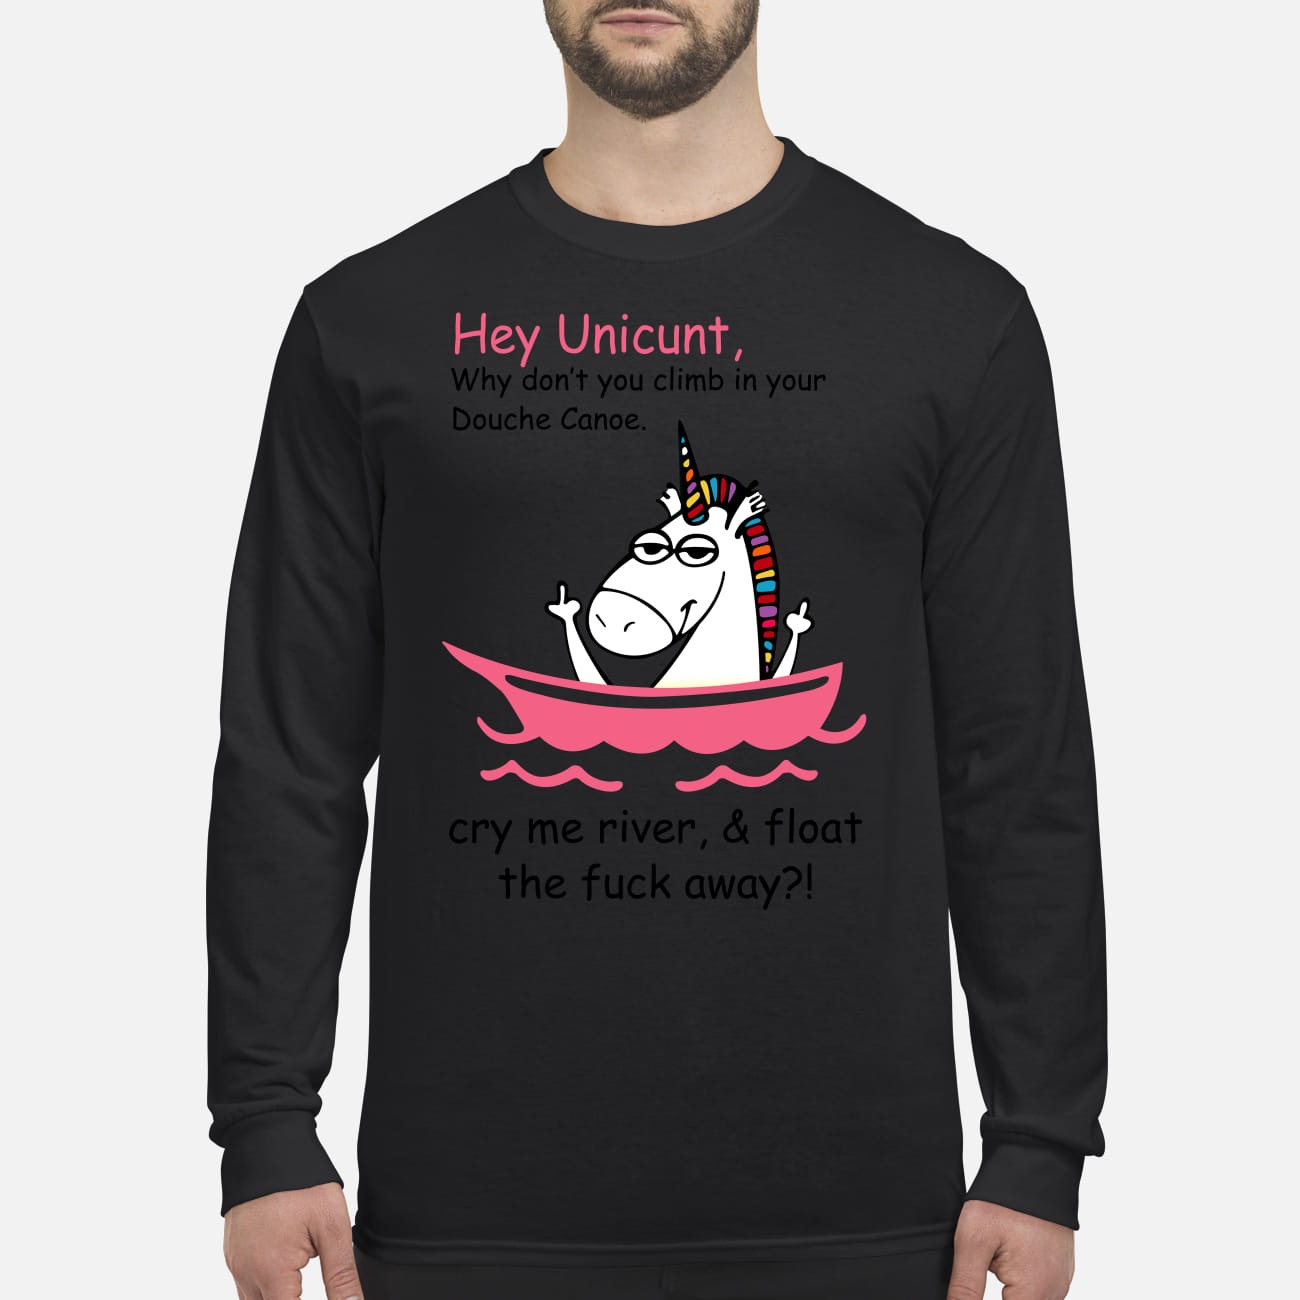 Unicunt climb in your Douche Canoe cry me river men's long sleeved shirt